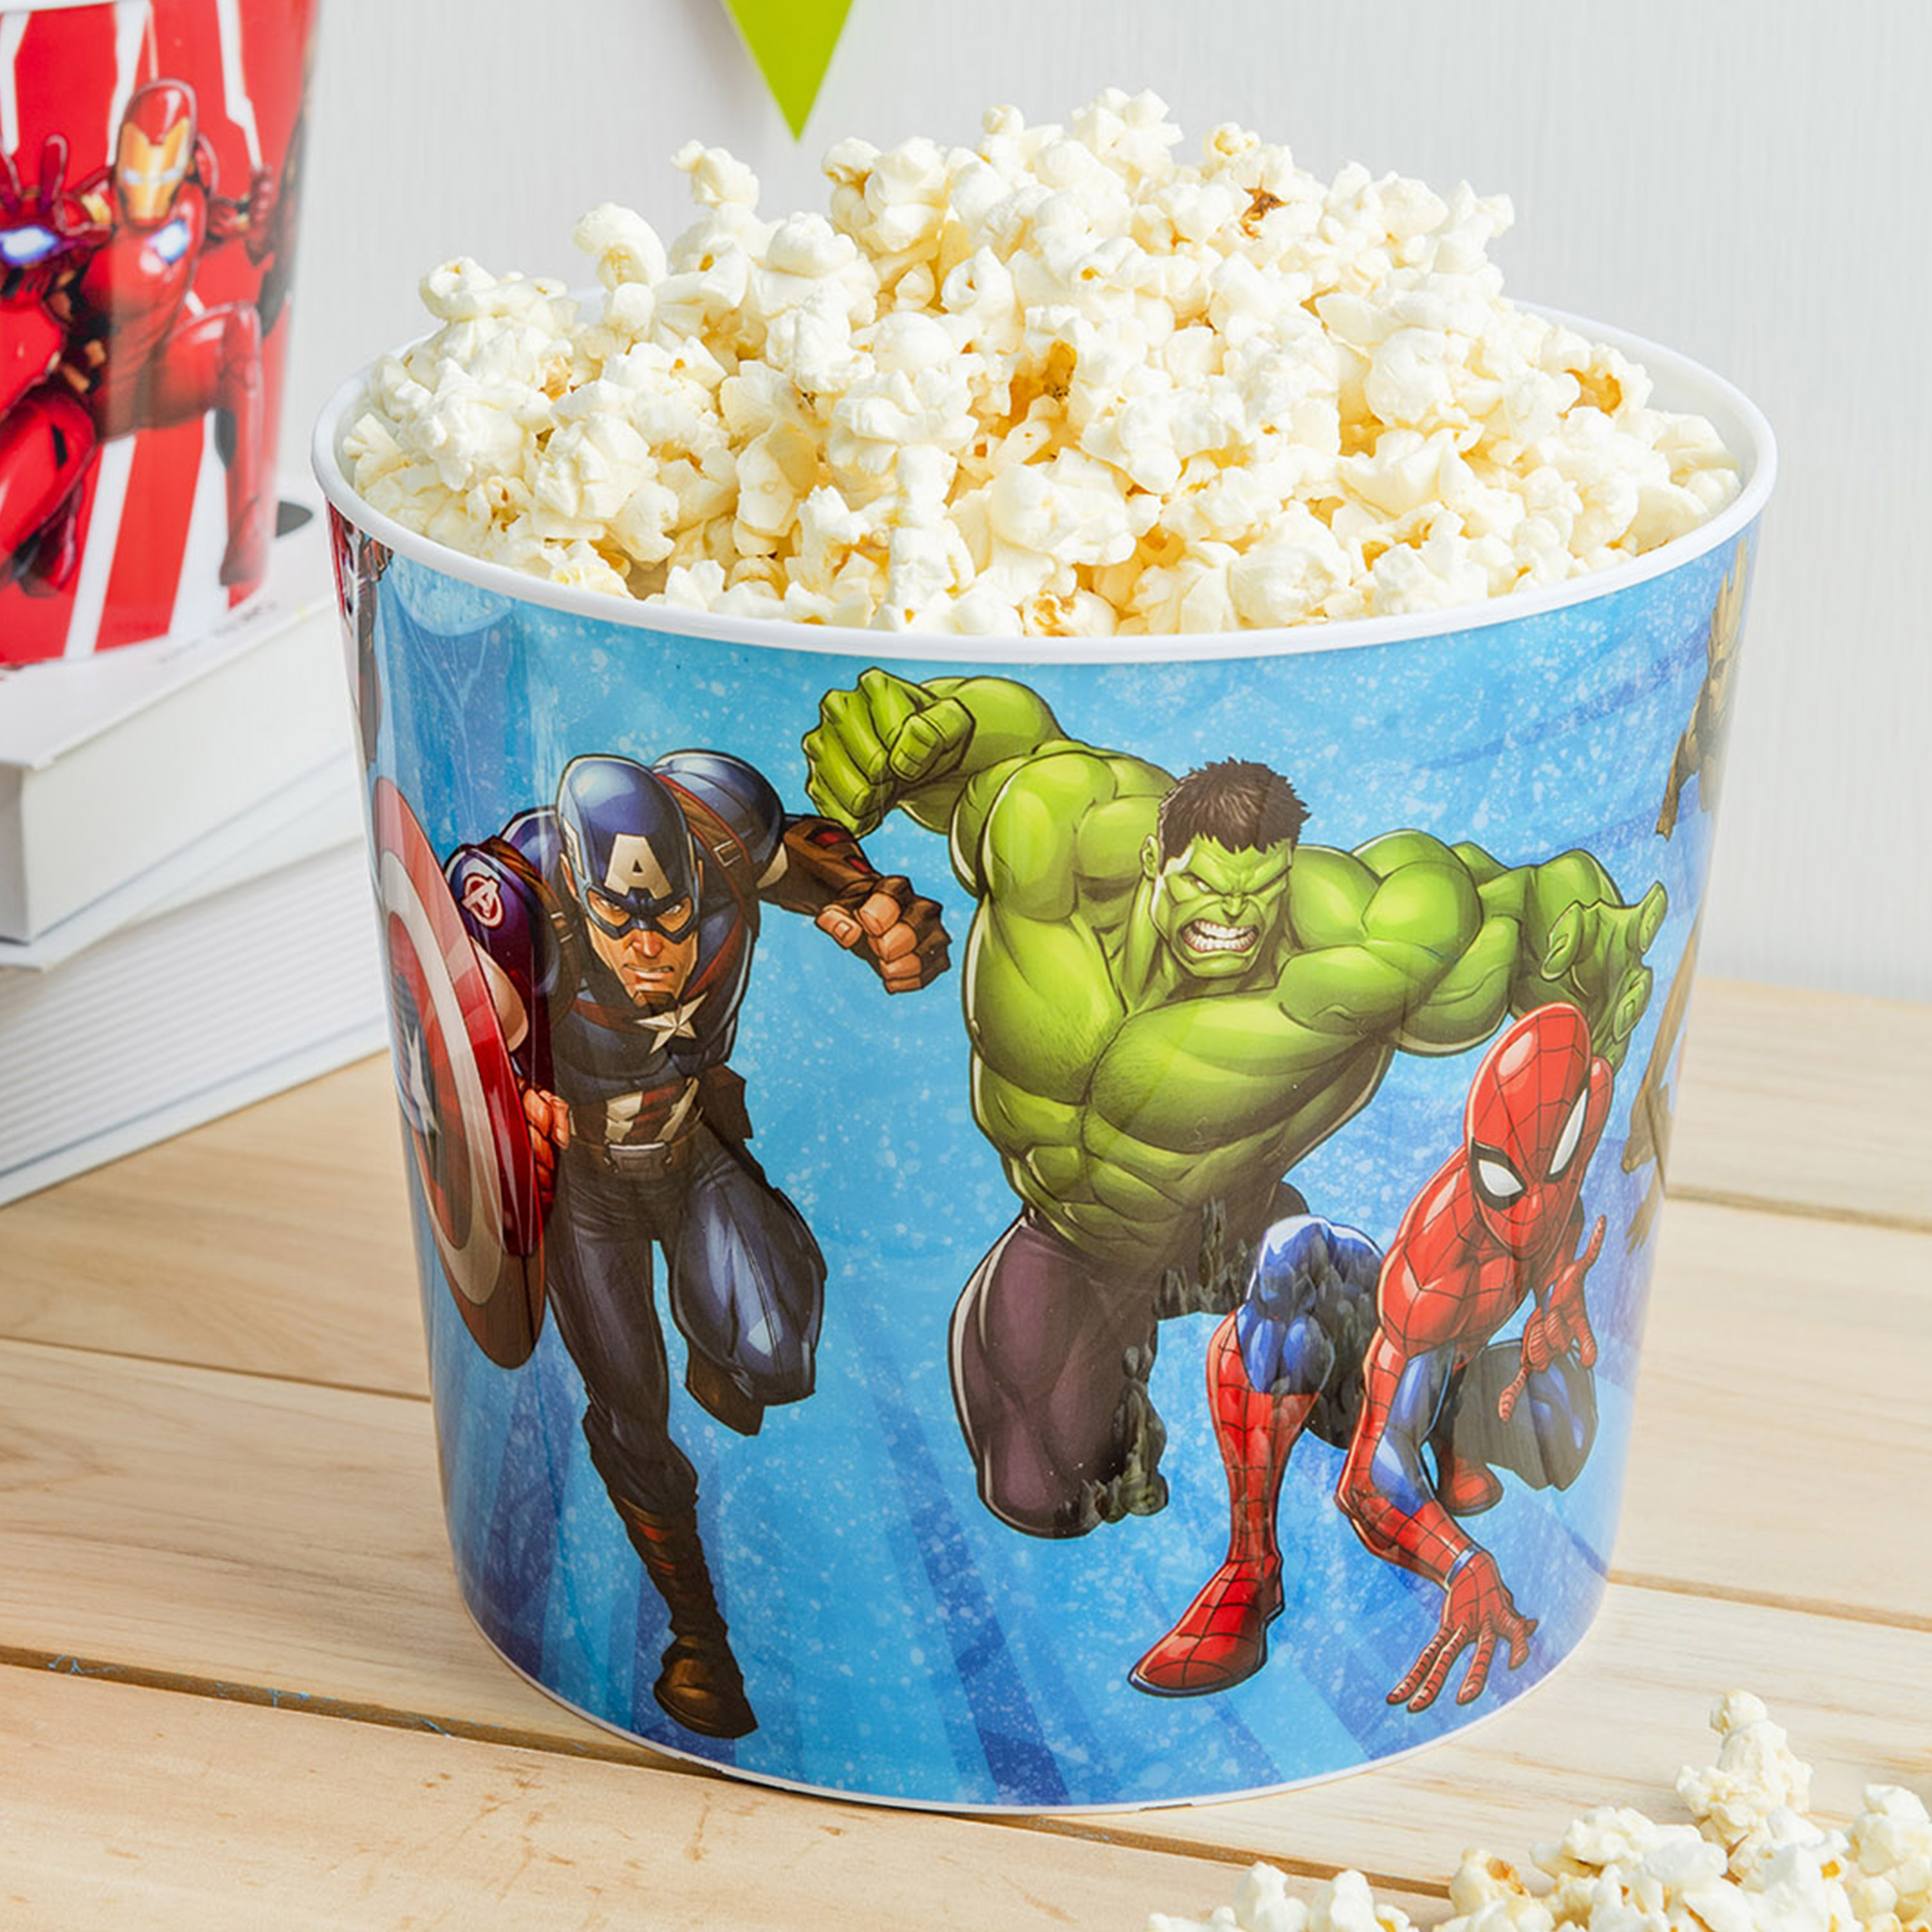 Marvel Comics Plastic Popcorn Container and Bowls, The Hulk, Spider-Man and More, 5-piece set slideshow image 5